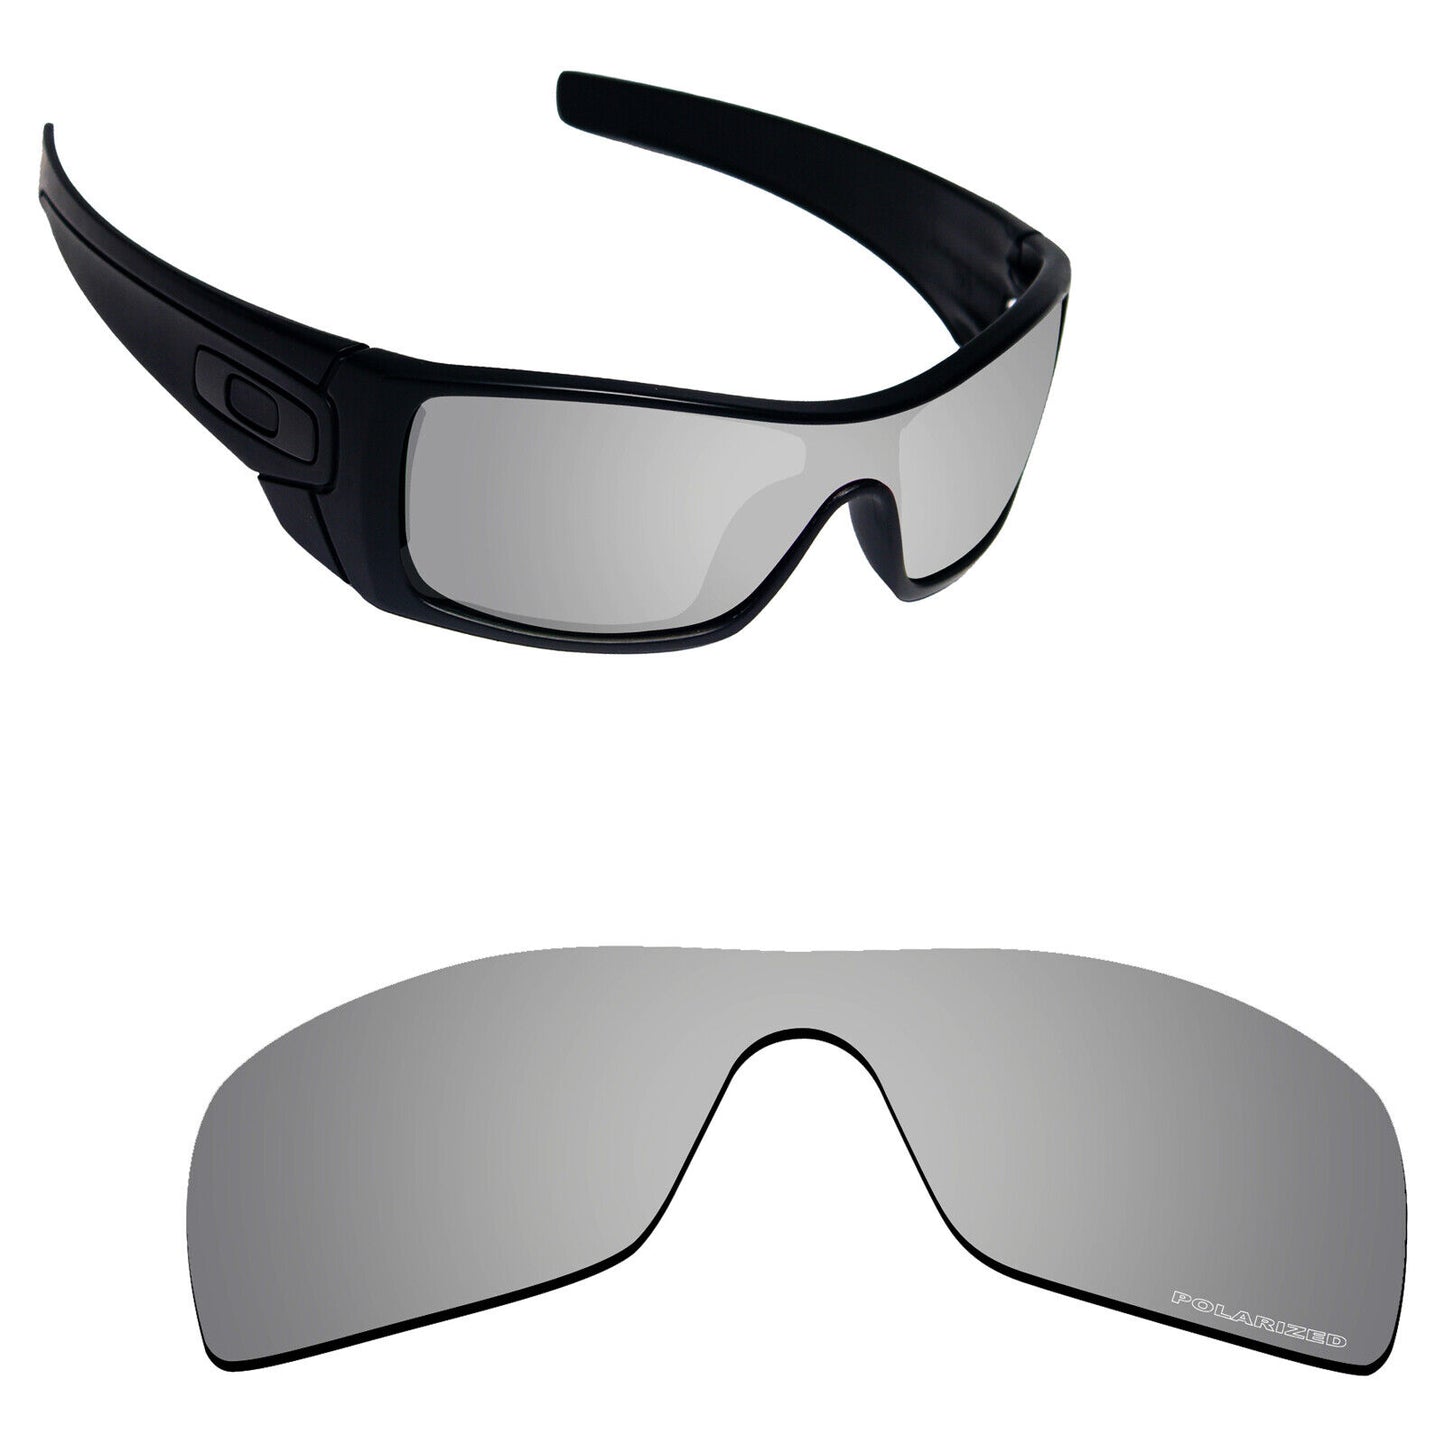 Hawkry Polarized Replacement Lenses for-Oakley Batwolf OO9101 Sunglass - Options